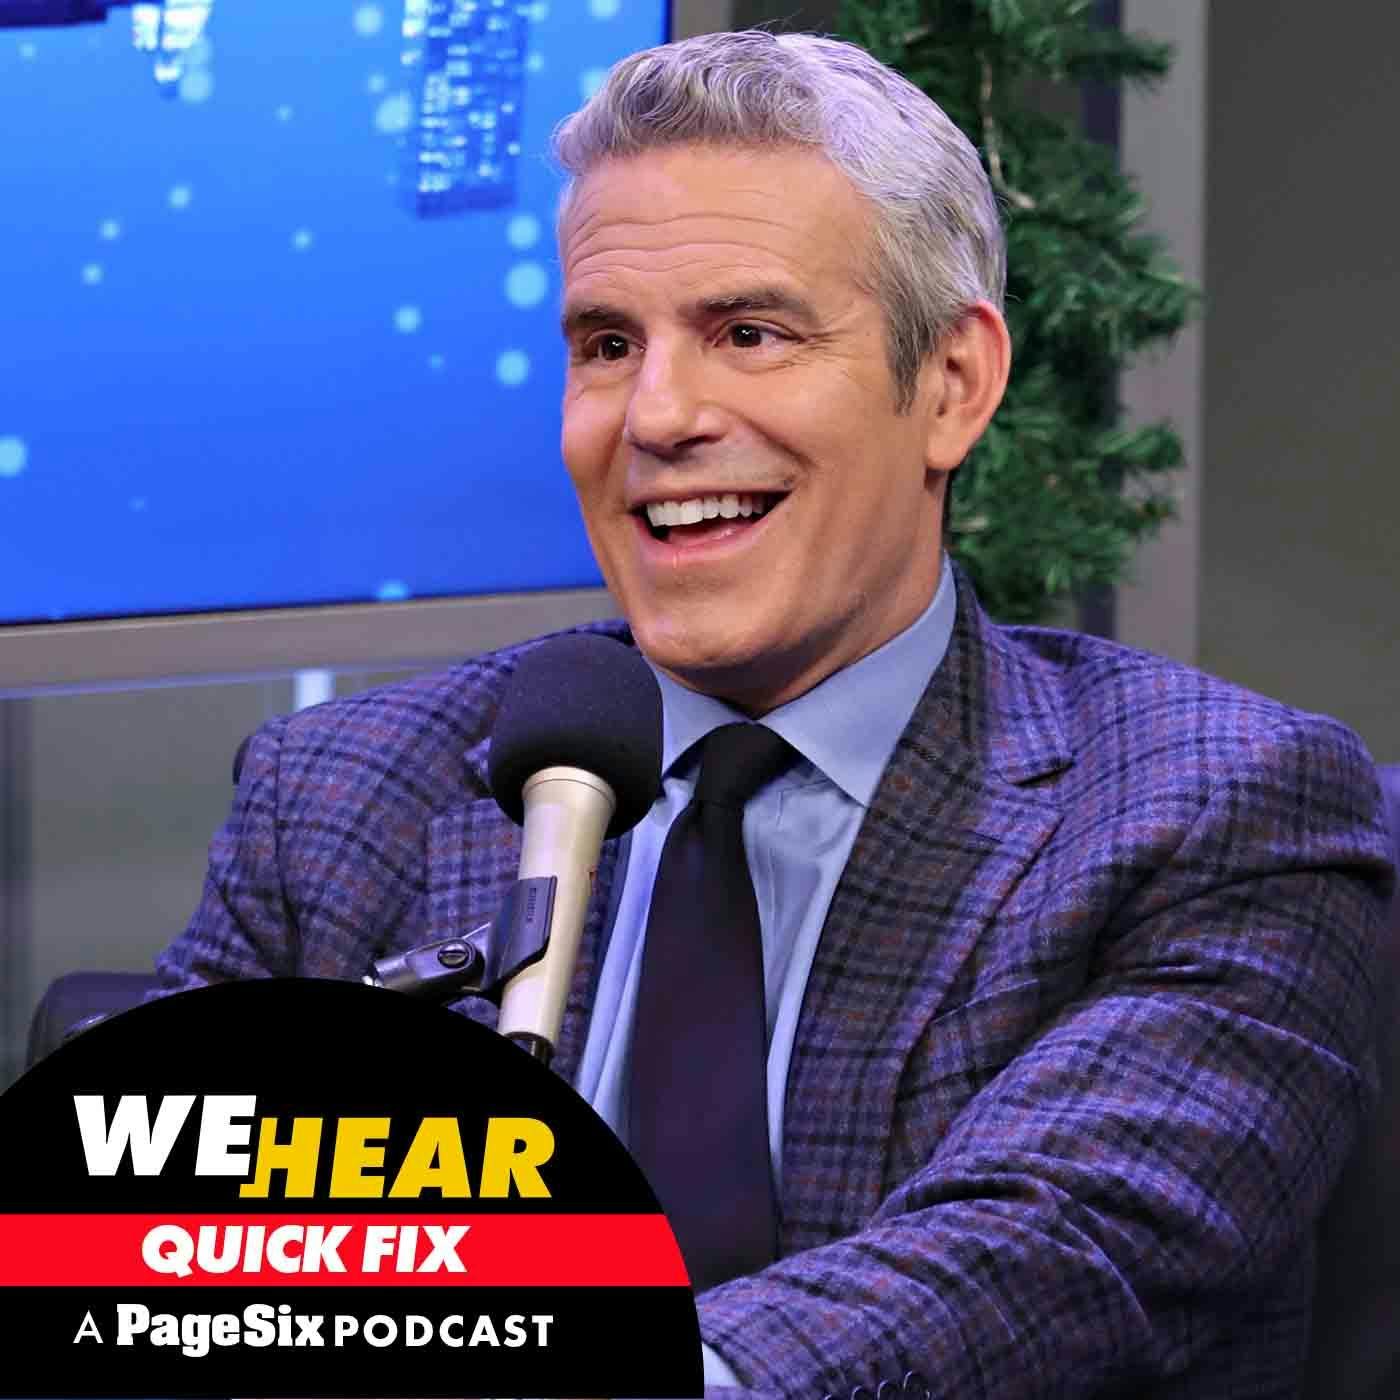 Andy Cohen clarifies his drinking plans for New Year's Eve broadcast, more